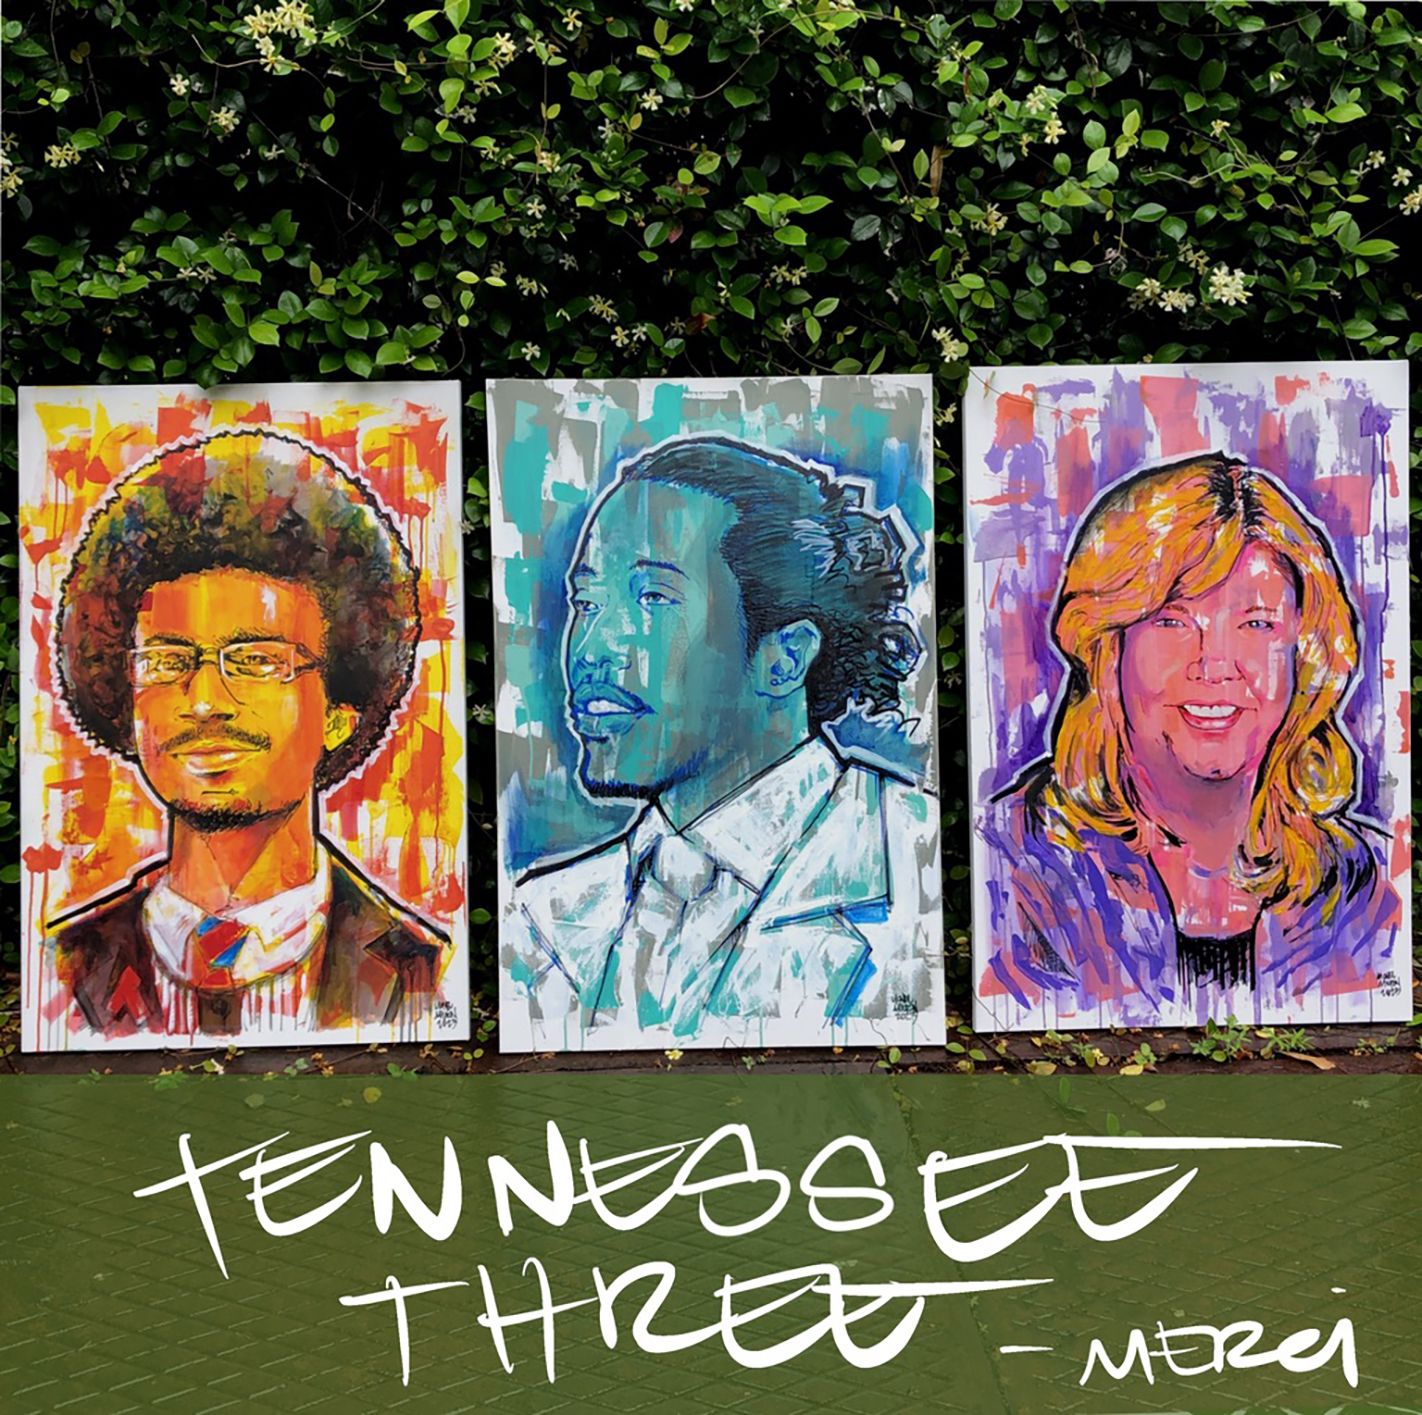 the Tennessee Three